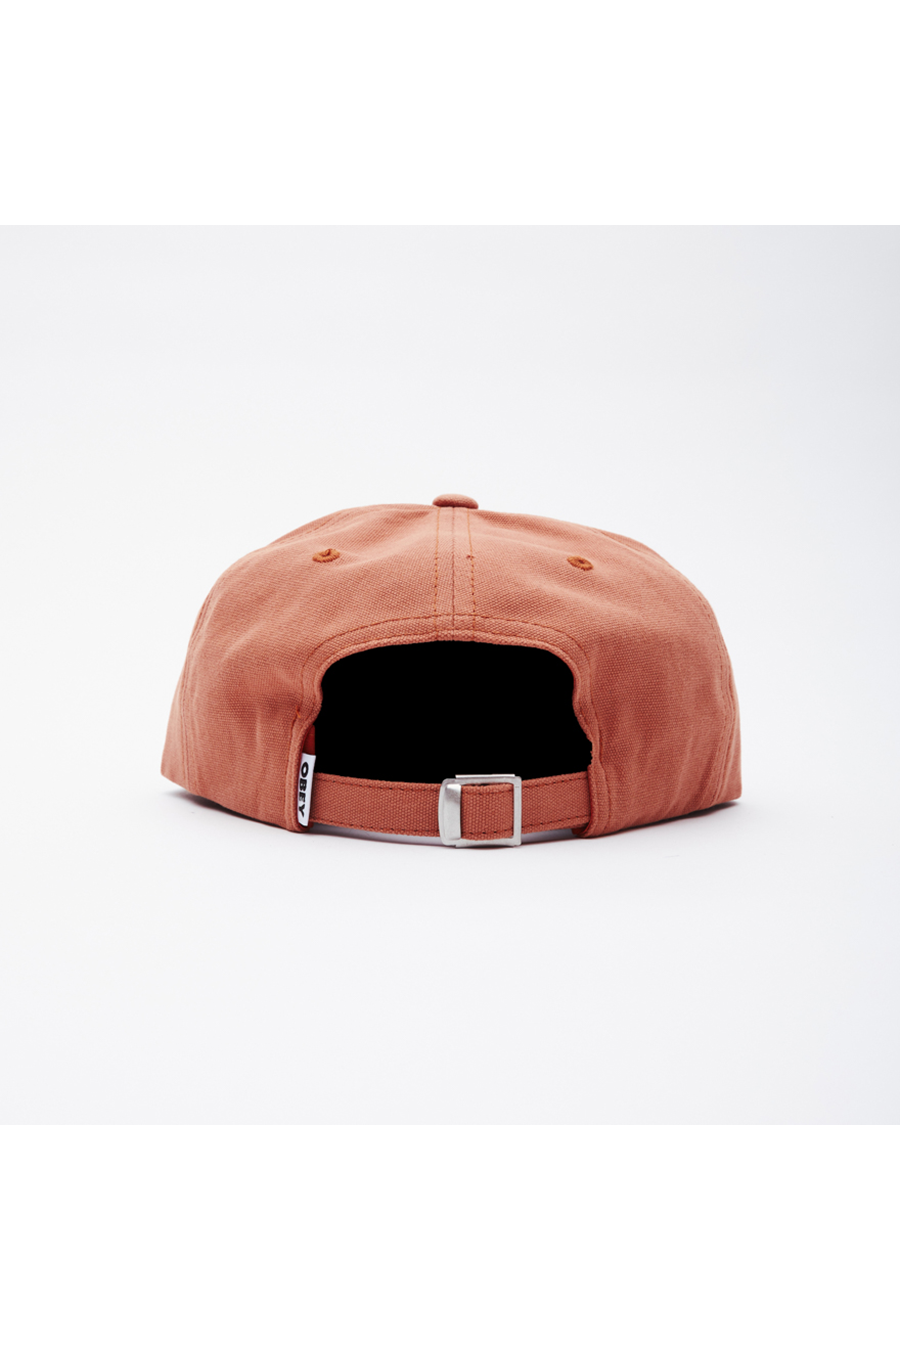 Bold Washed Canvas 6 Panel | Ginger - Main Image Number 2 of 2